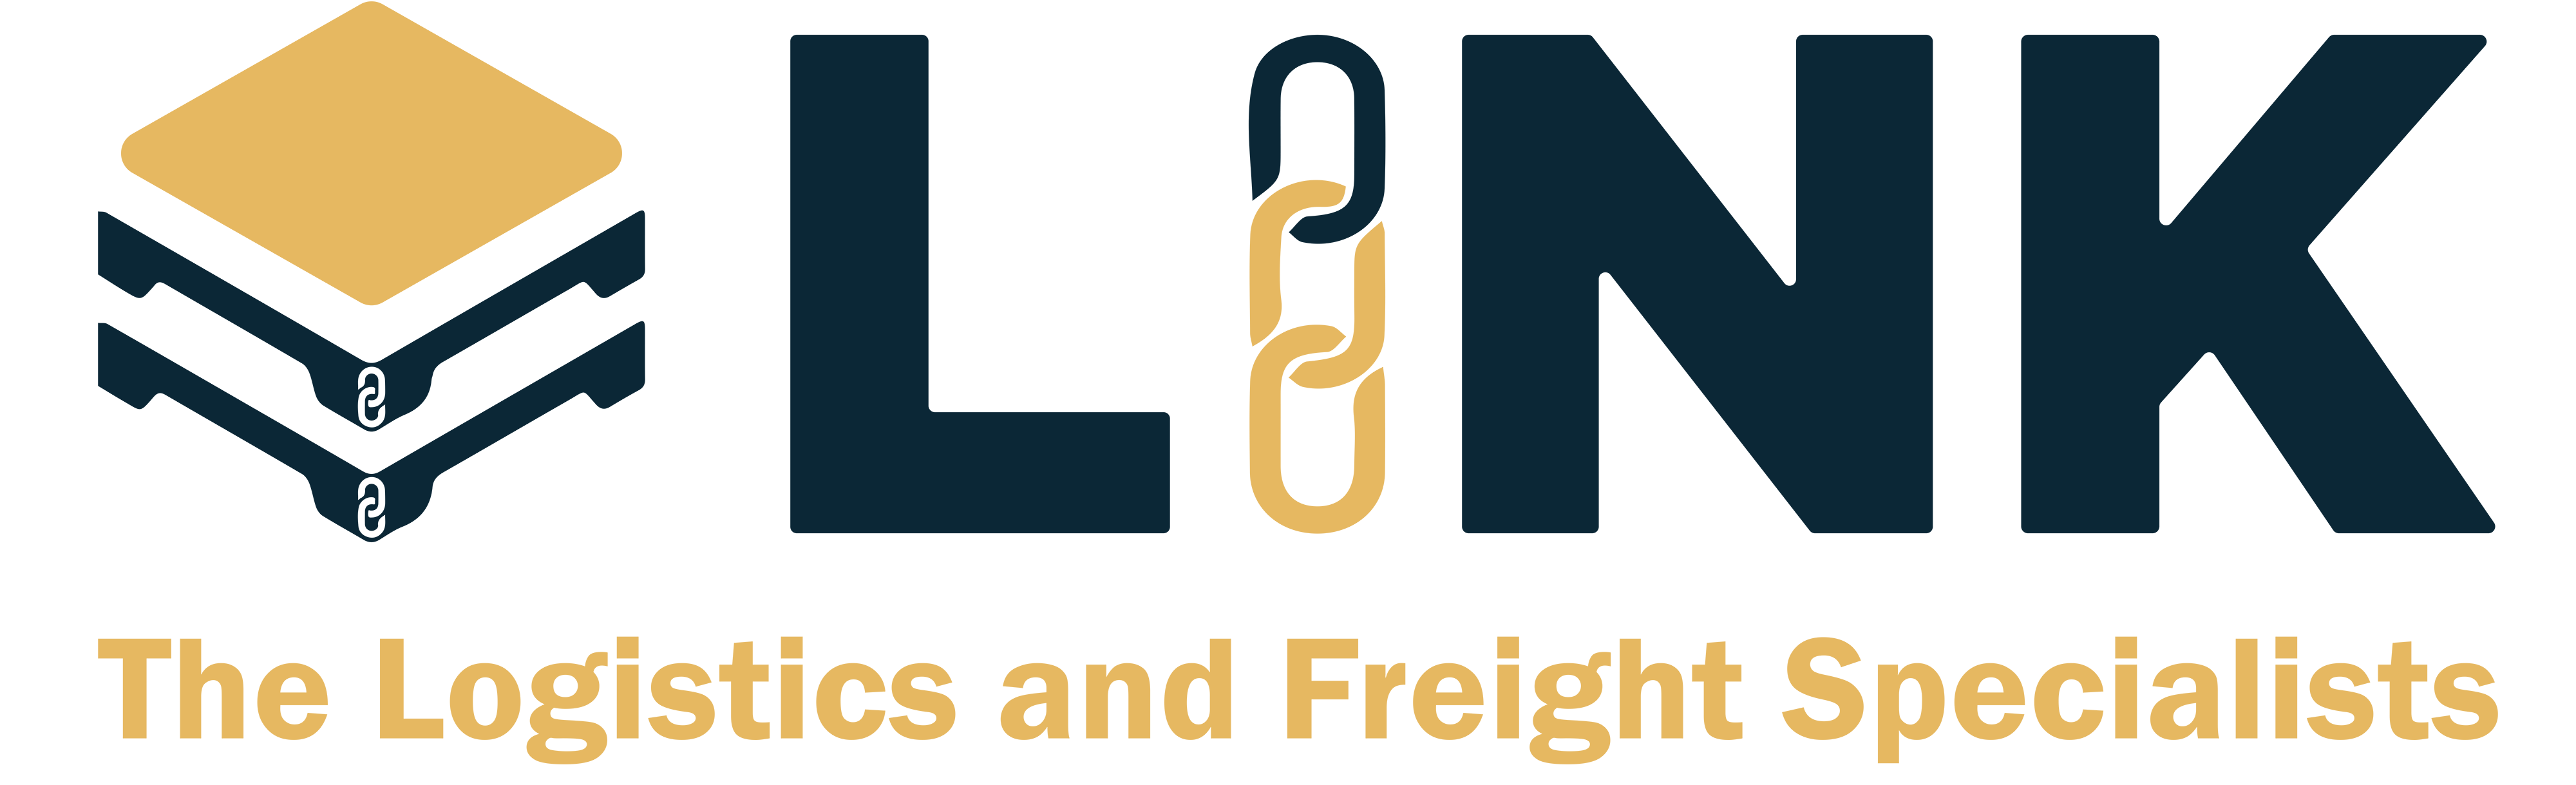 Link Logistics and Freight Limited